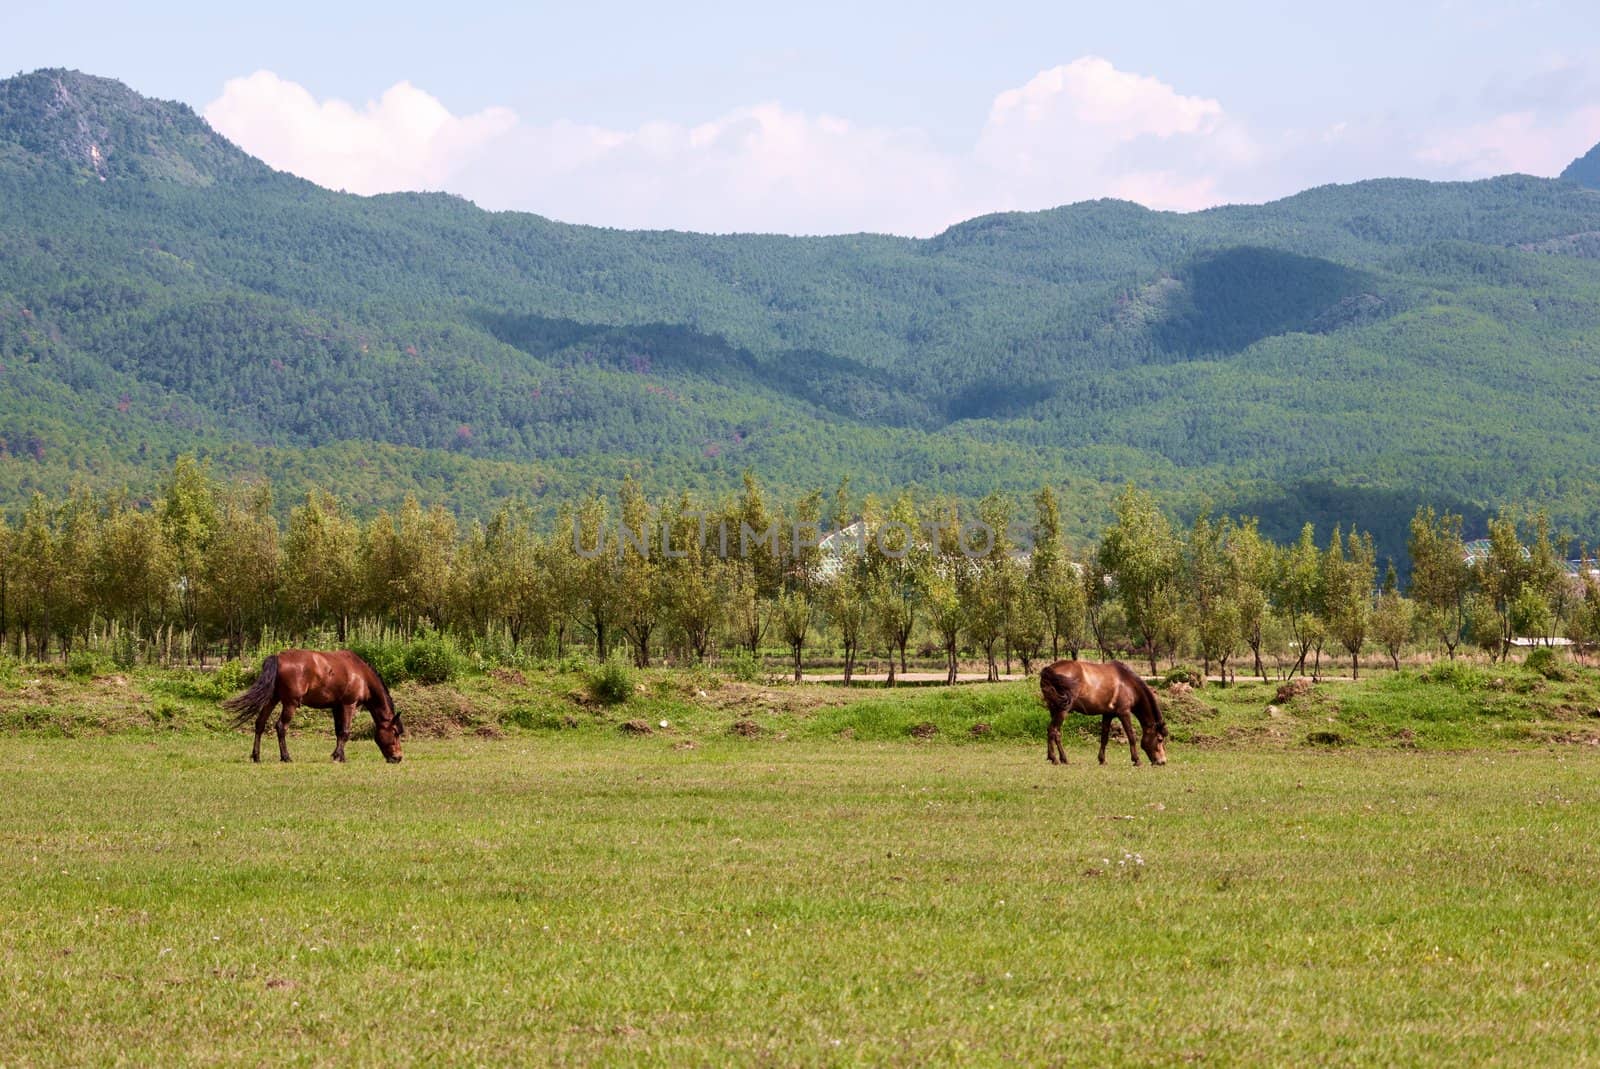 Two horses grazing on the meadow with mountain background in Lijiang, Yunnan province, China